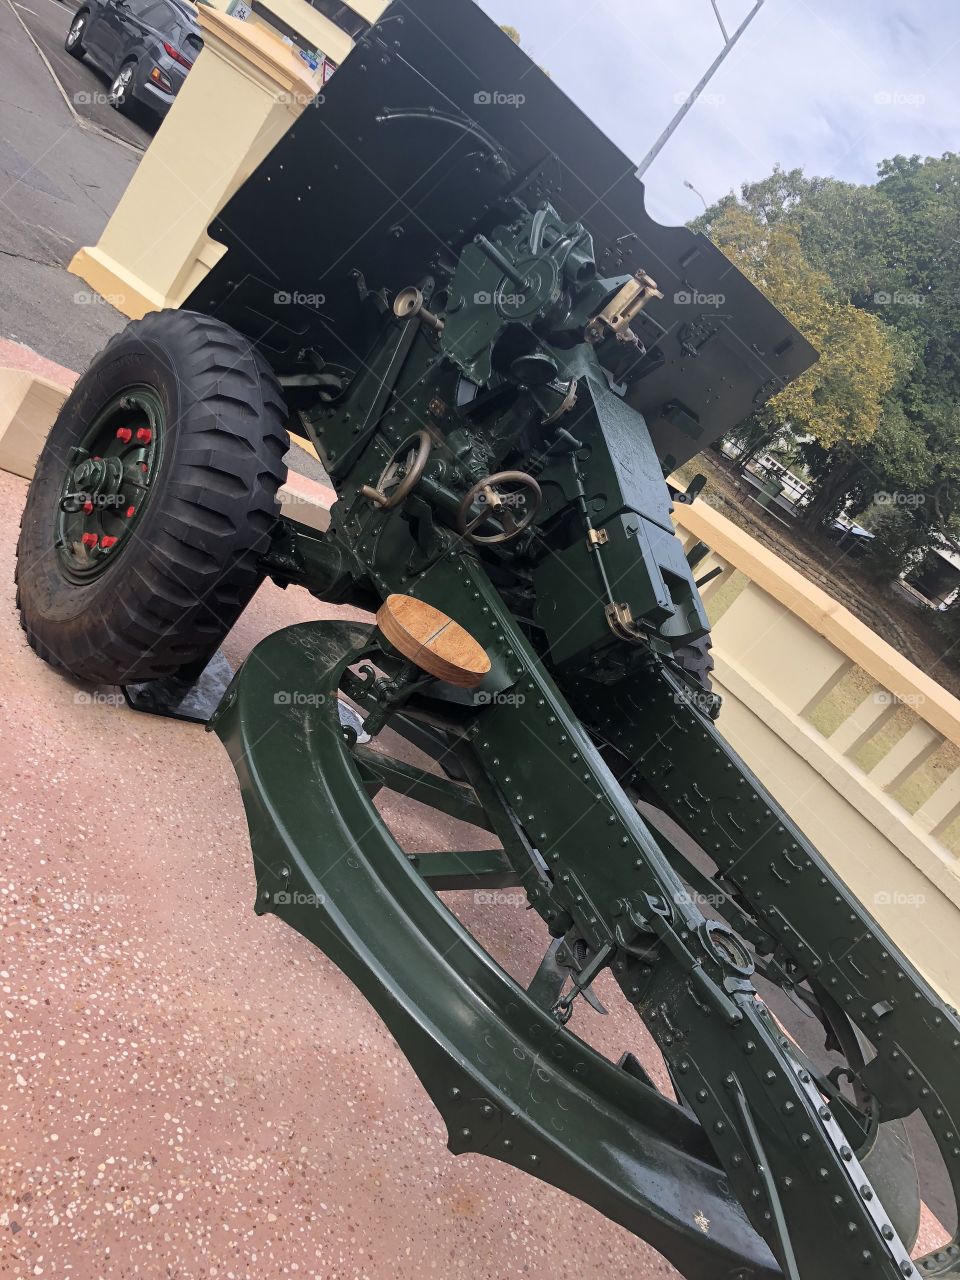 Restored military weapon